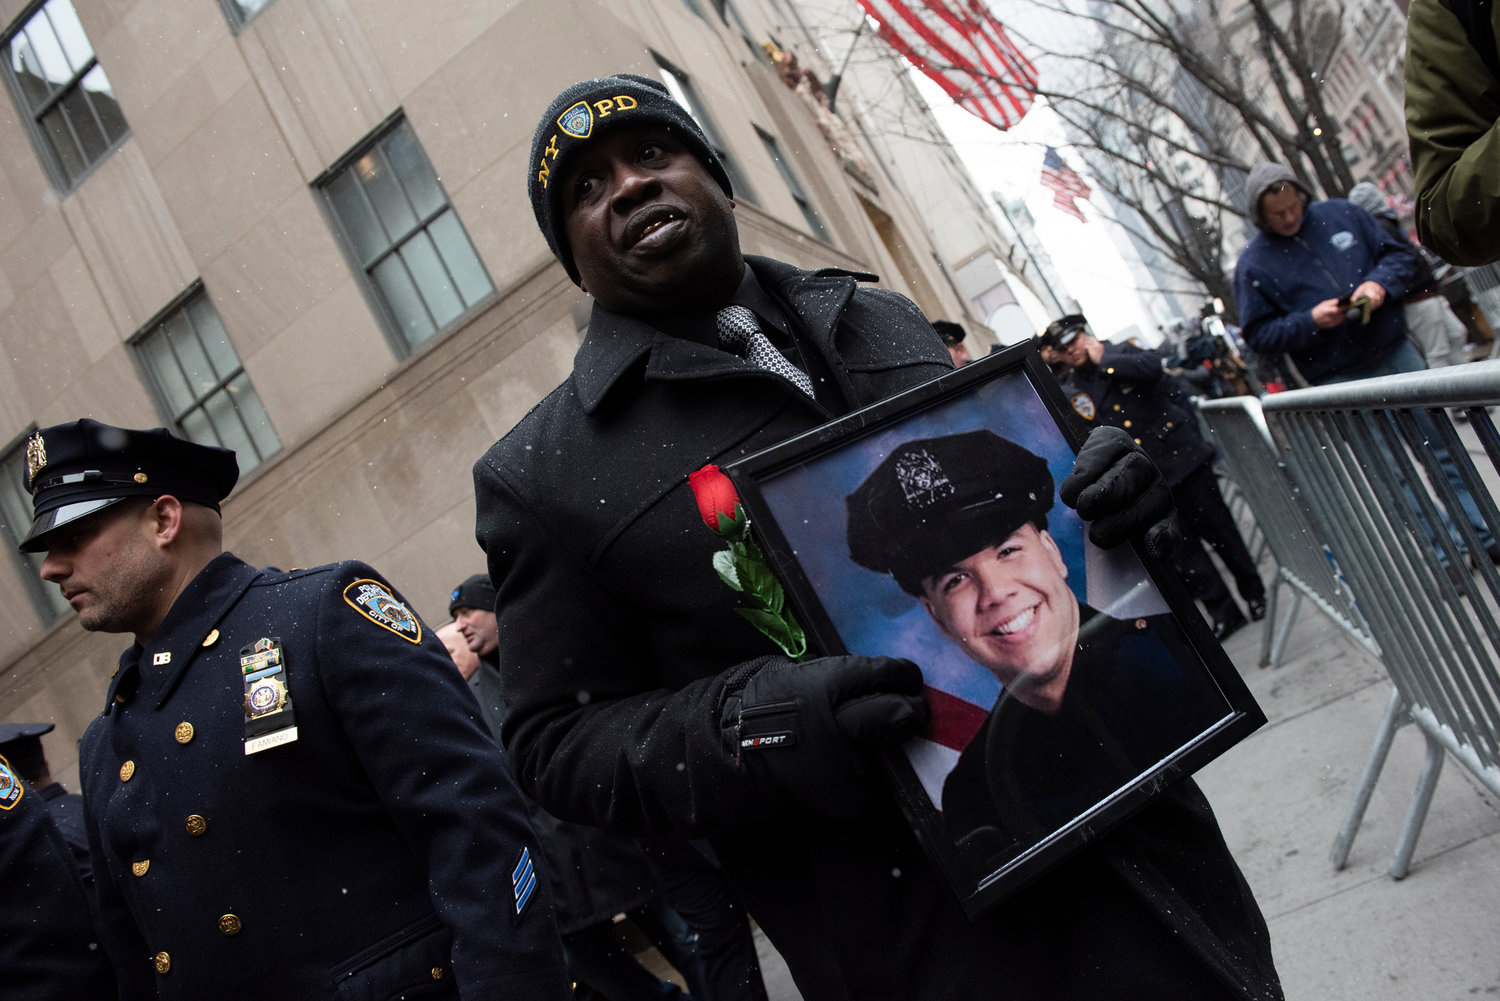 NYPD representative holds a framed portrait of a beaming Rivera in his NYPD uniform.